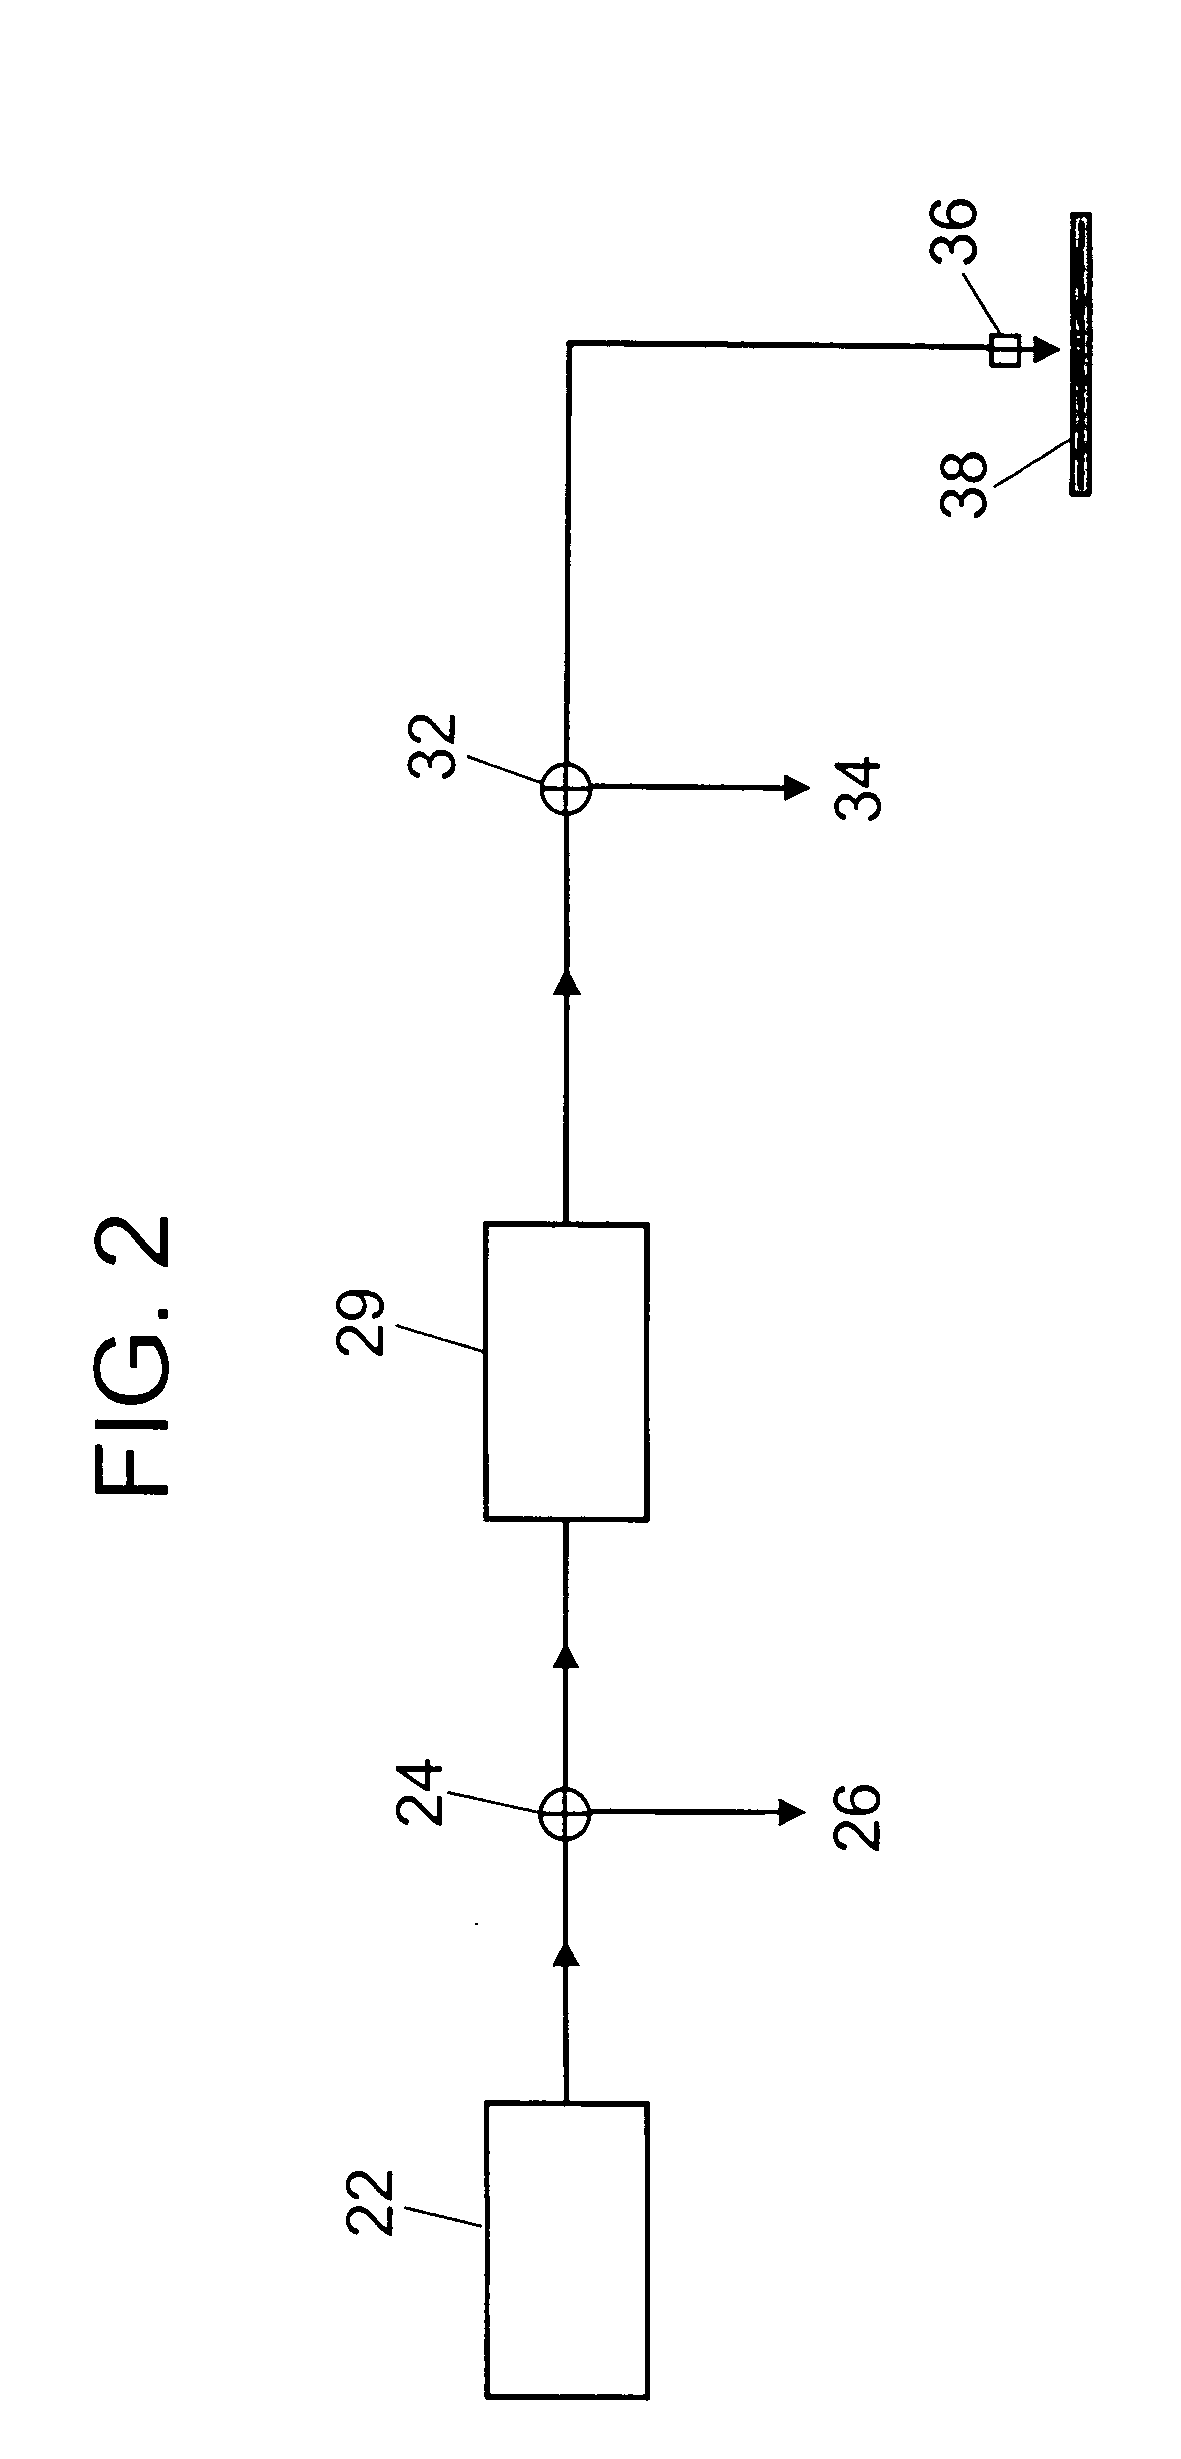 Apparatus for treating a substrate with an ozone-solvent solution